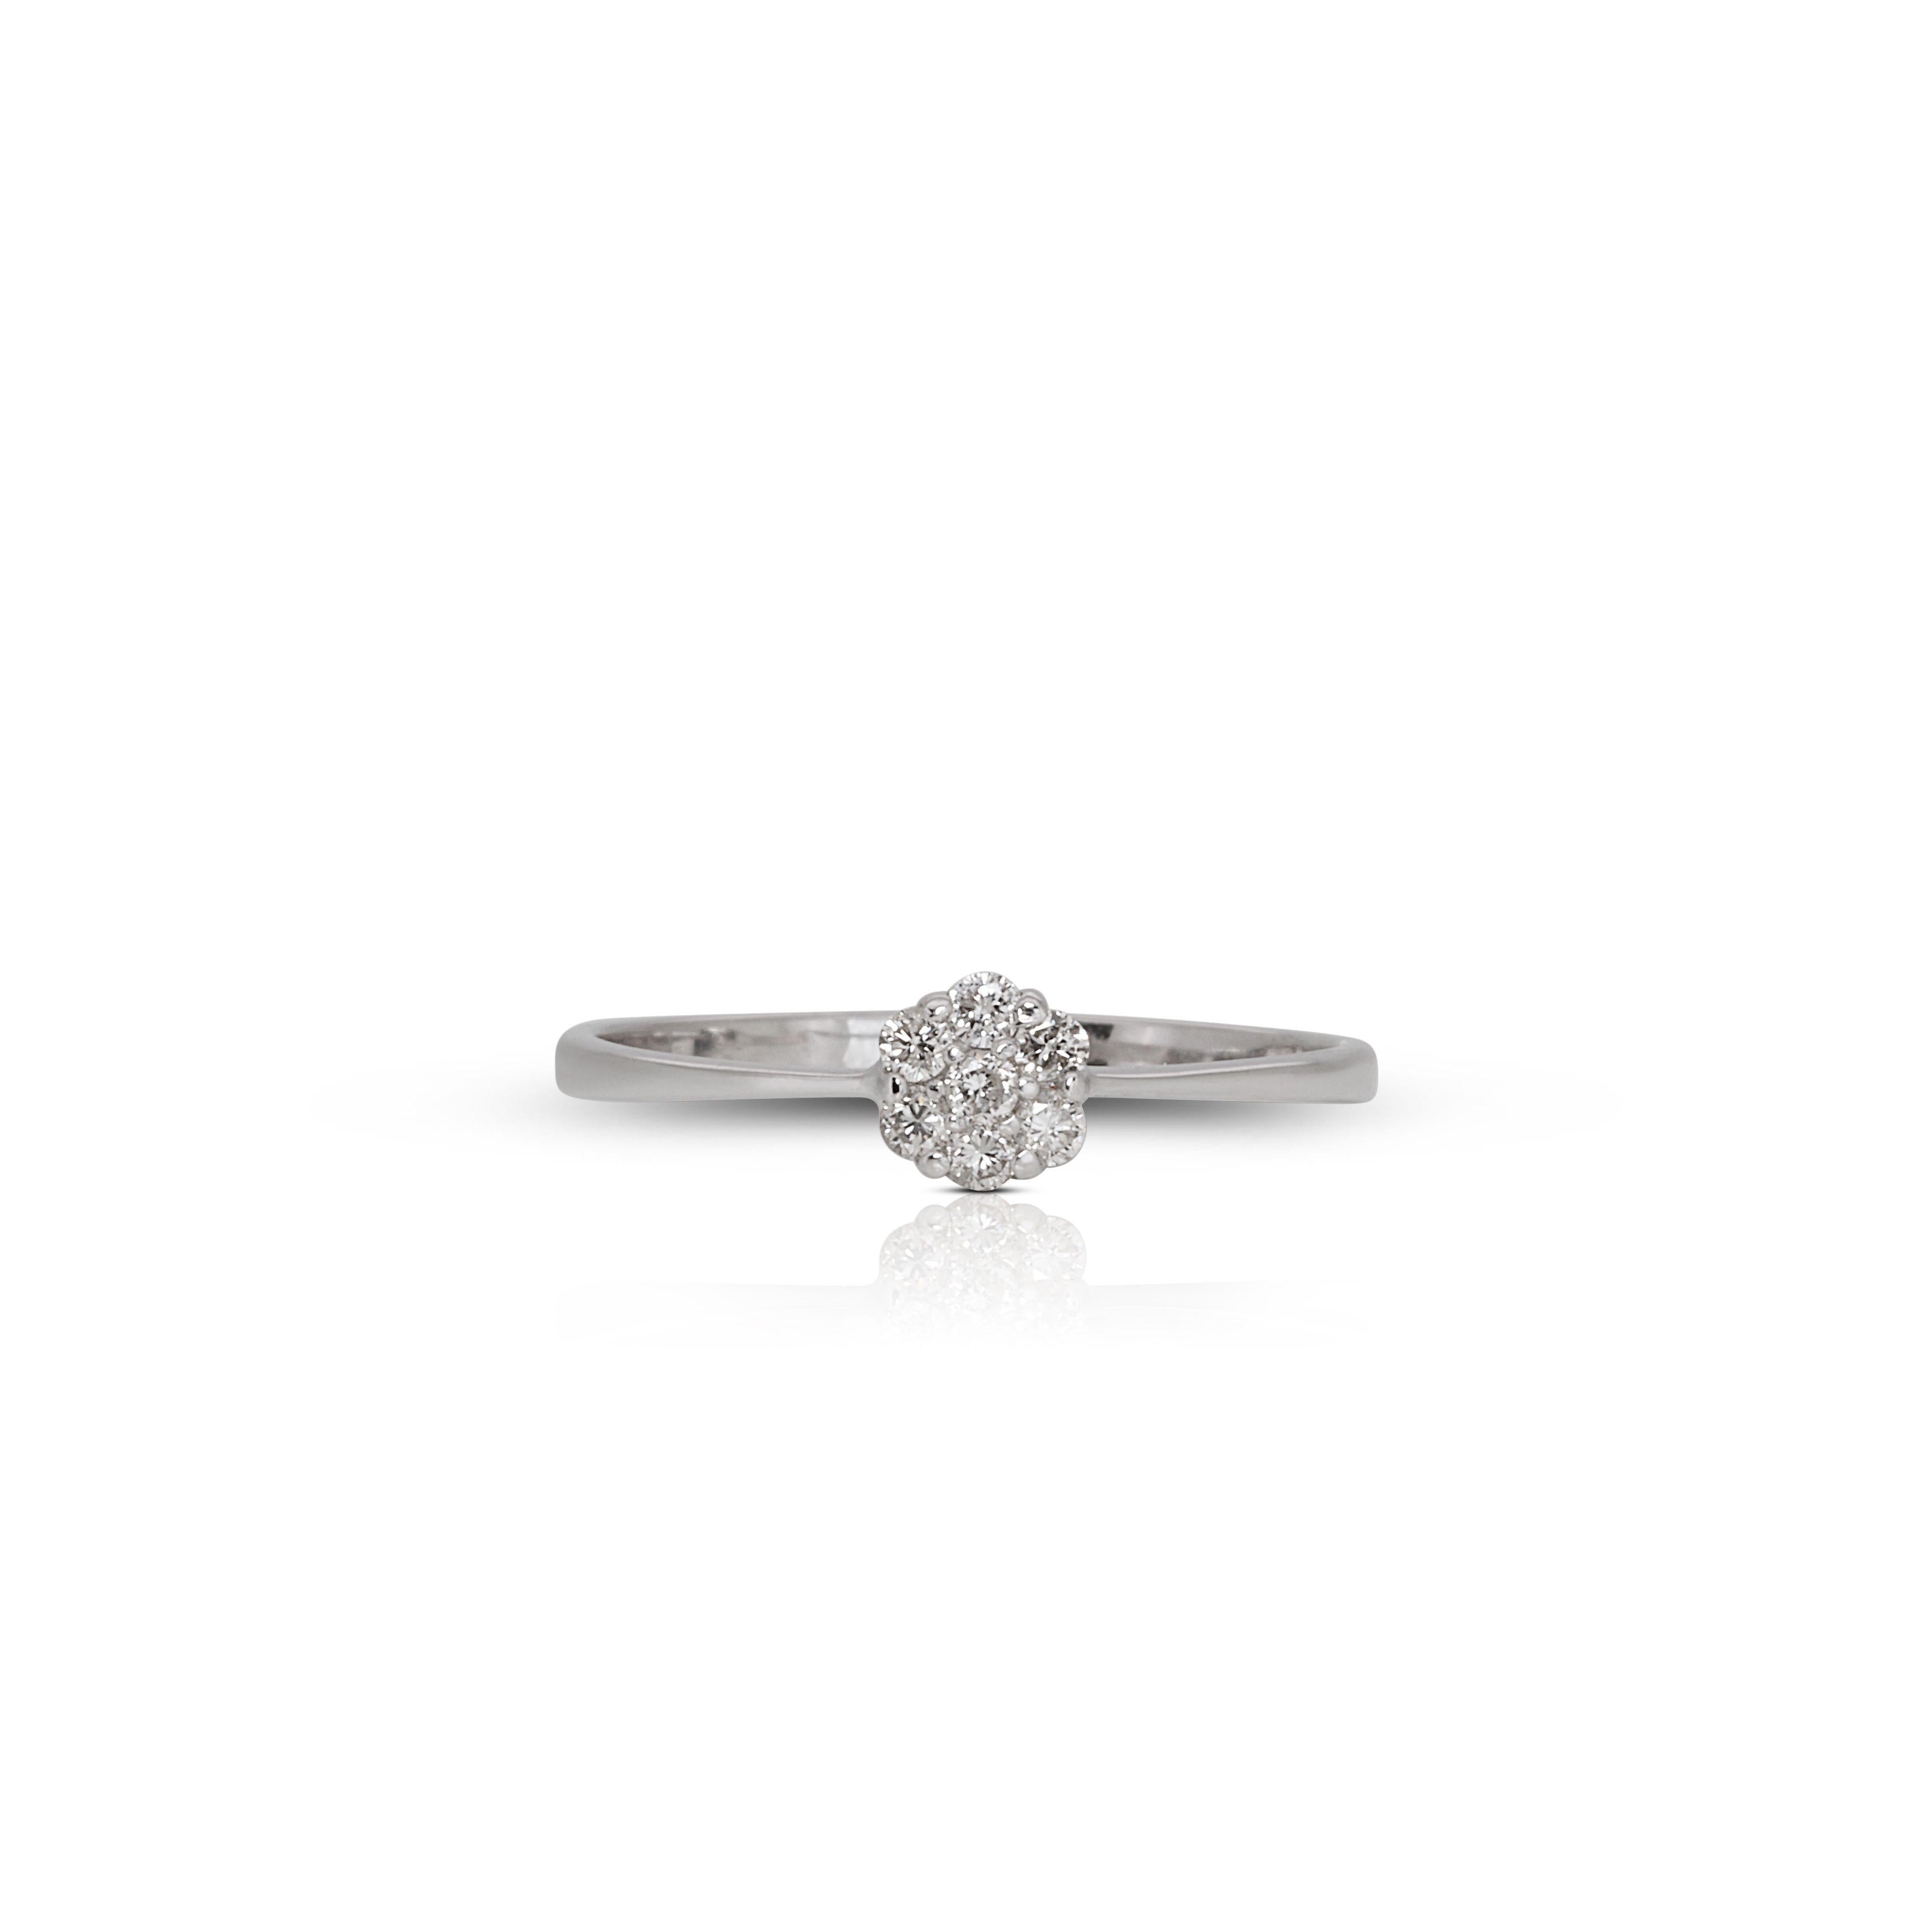 Sparkling 18k White Gold Diamond Ring with .20ct Natural Diamond

Our exquisite 18k White Gold Diamond Ring is a timeless masterpiece that seamlessly blends sophistication and elegance. Crafted with precision and attention to detail, this stunning